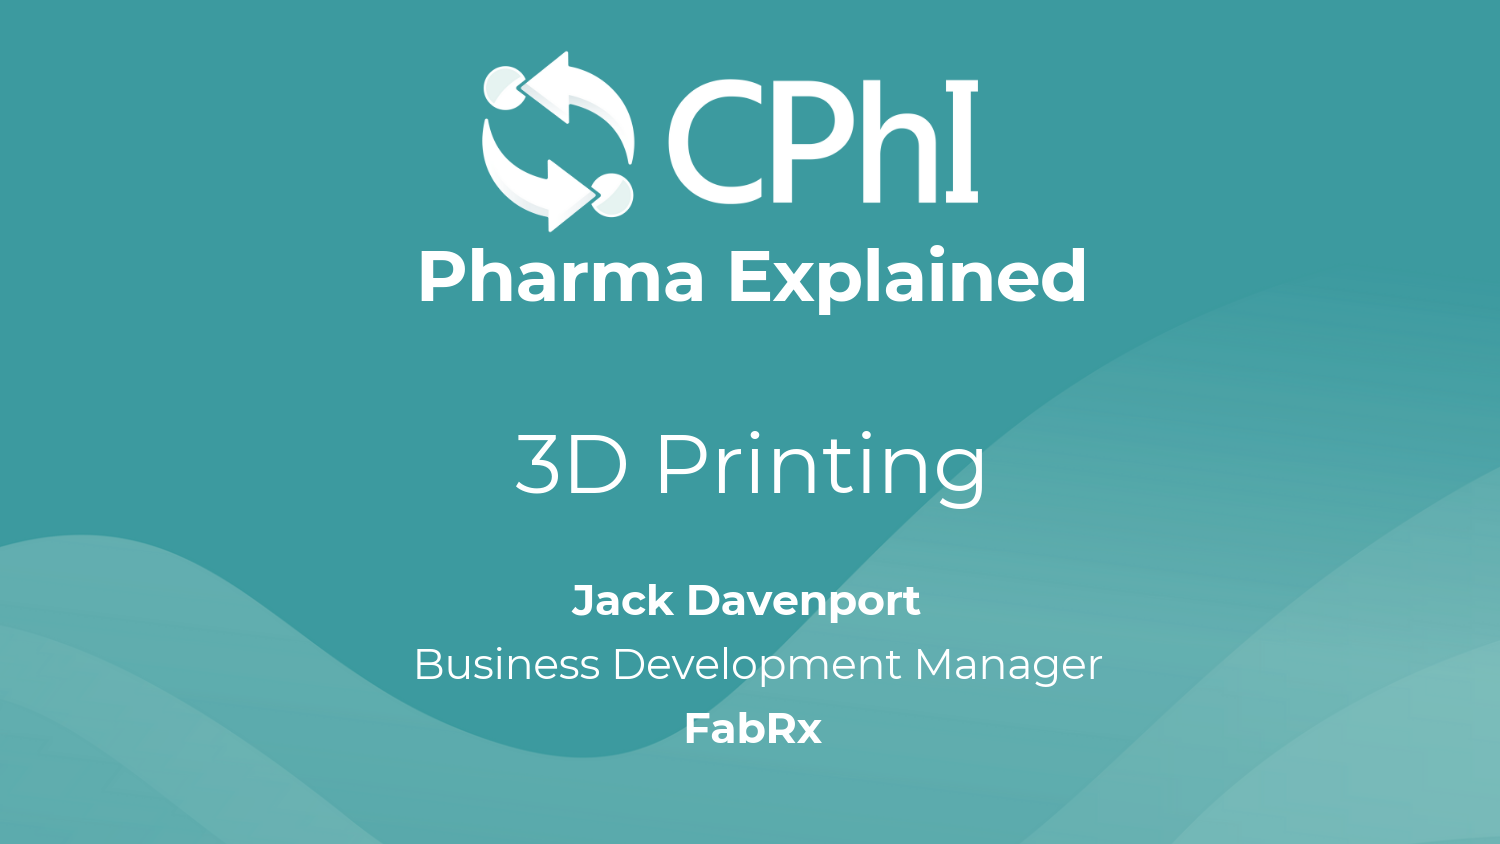 Pharma Explained: What does 3D Printing actually mean for Pharmaceuticals?